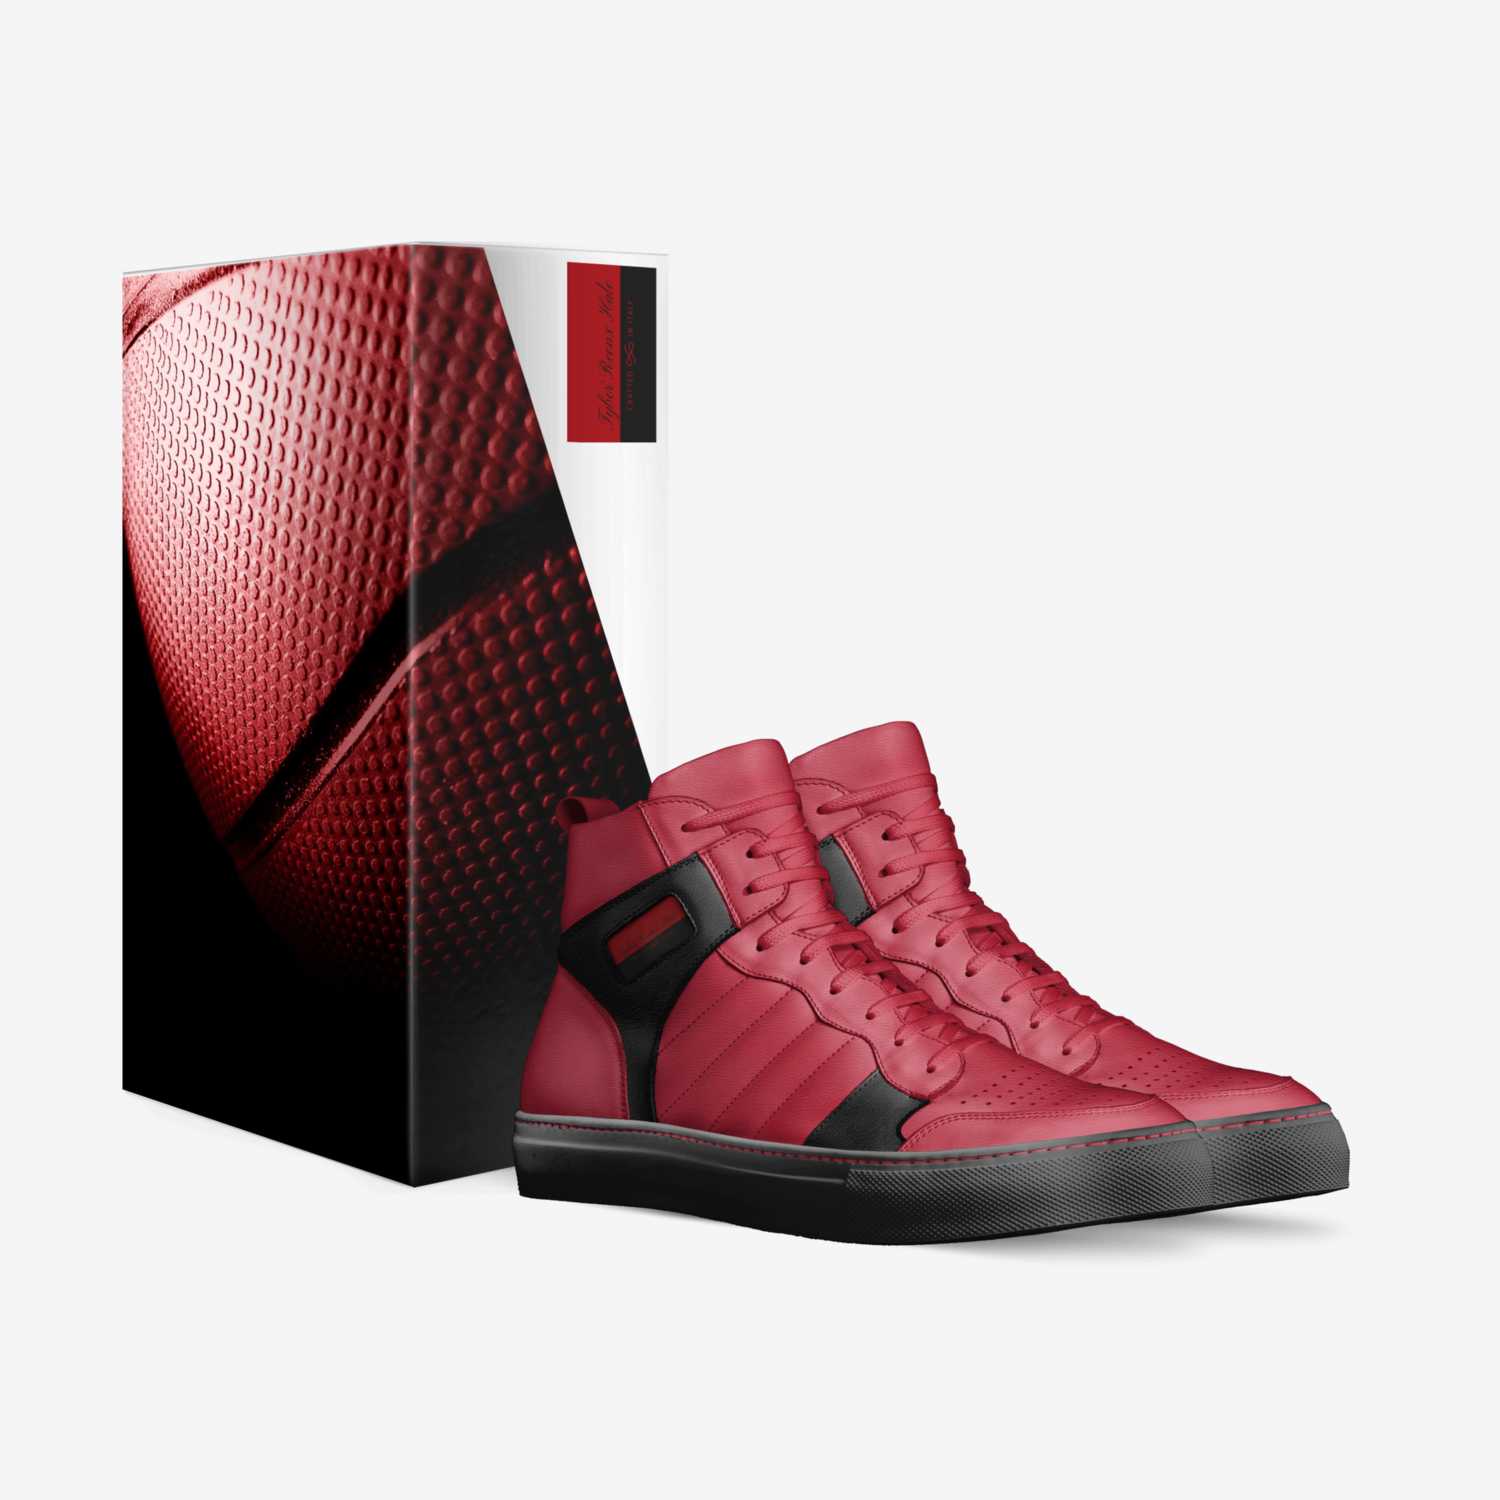 Tybor´Reonx Hale custom made in Italy shoes by Tybor'Reonx Bufford | Box view